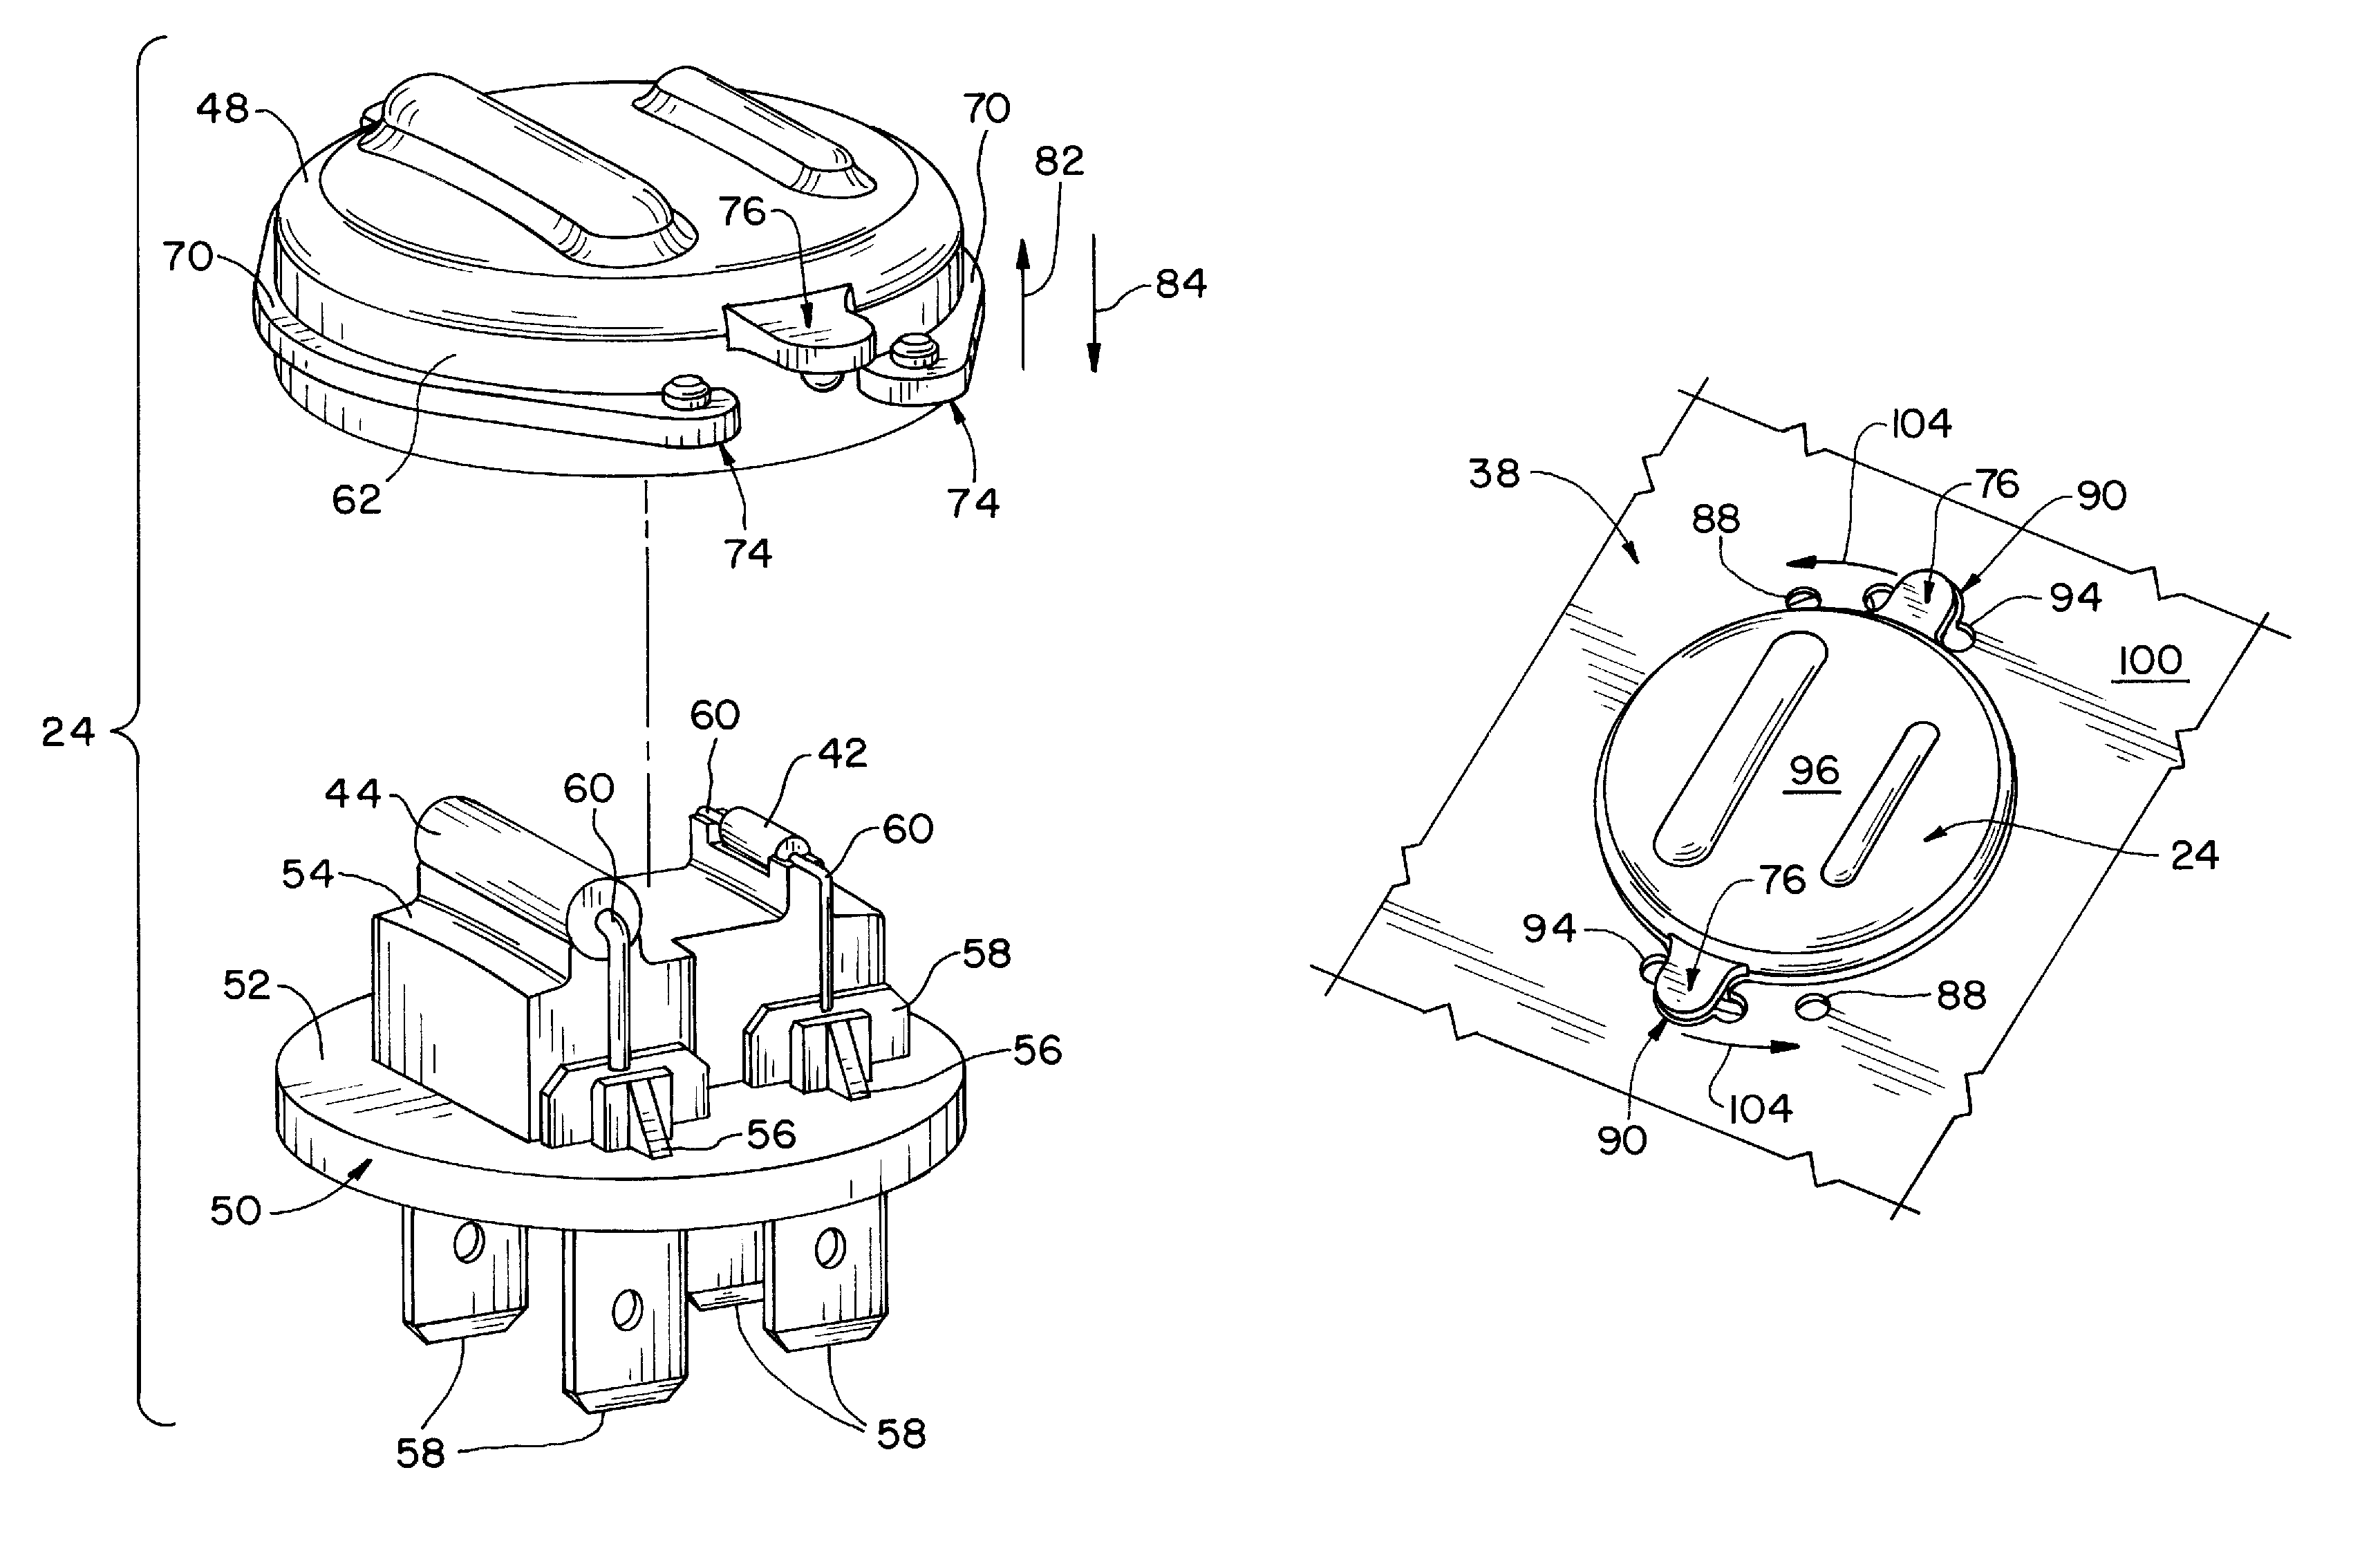 Appliance assembly with thermal fuse and temperature sensing device assembly